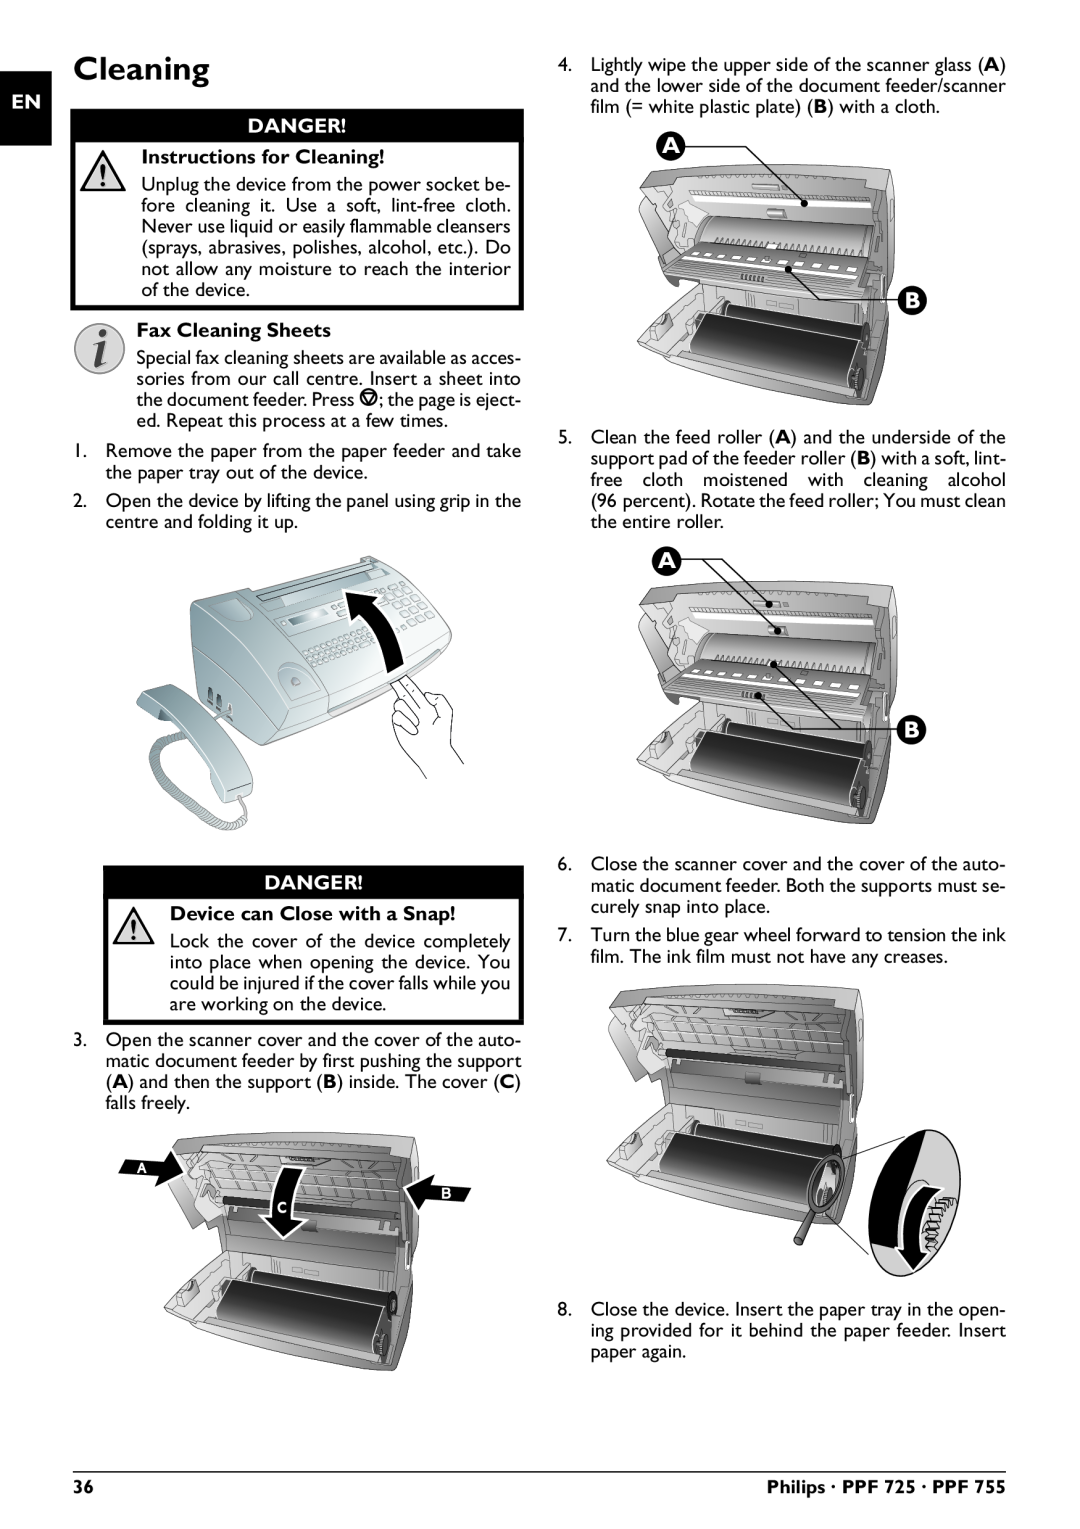 Philips PPF 755, PPF 725 Danger, Instructions for Cleaning, Fax Cleaning Sheets, Device can Close with a Snap 